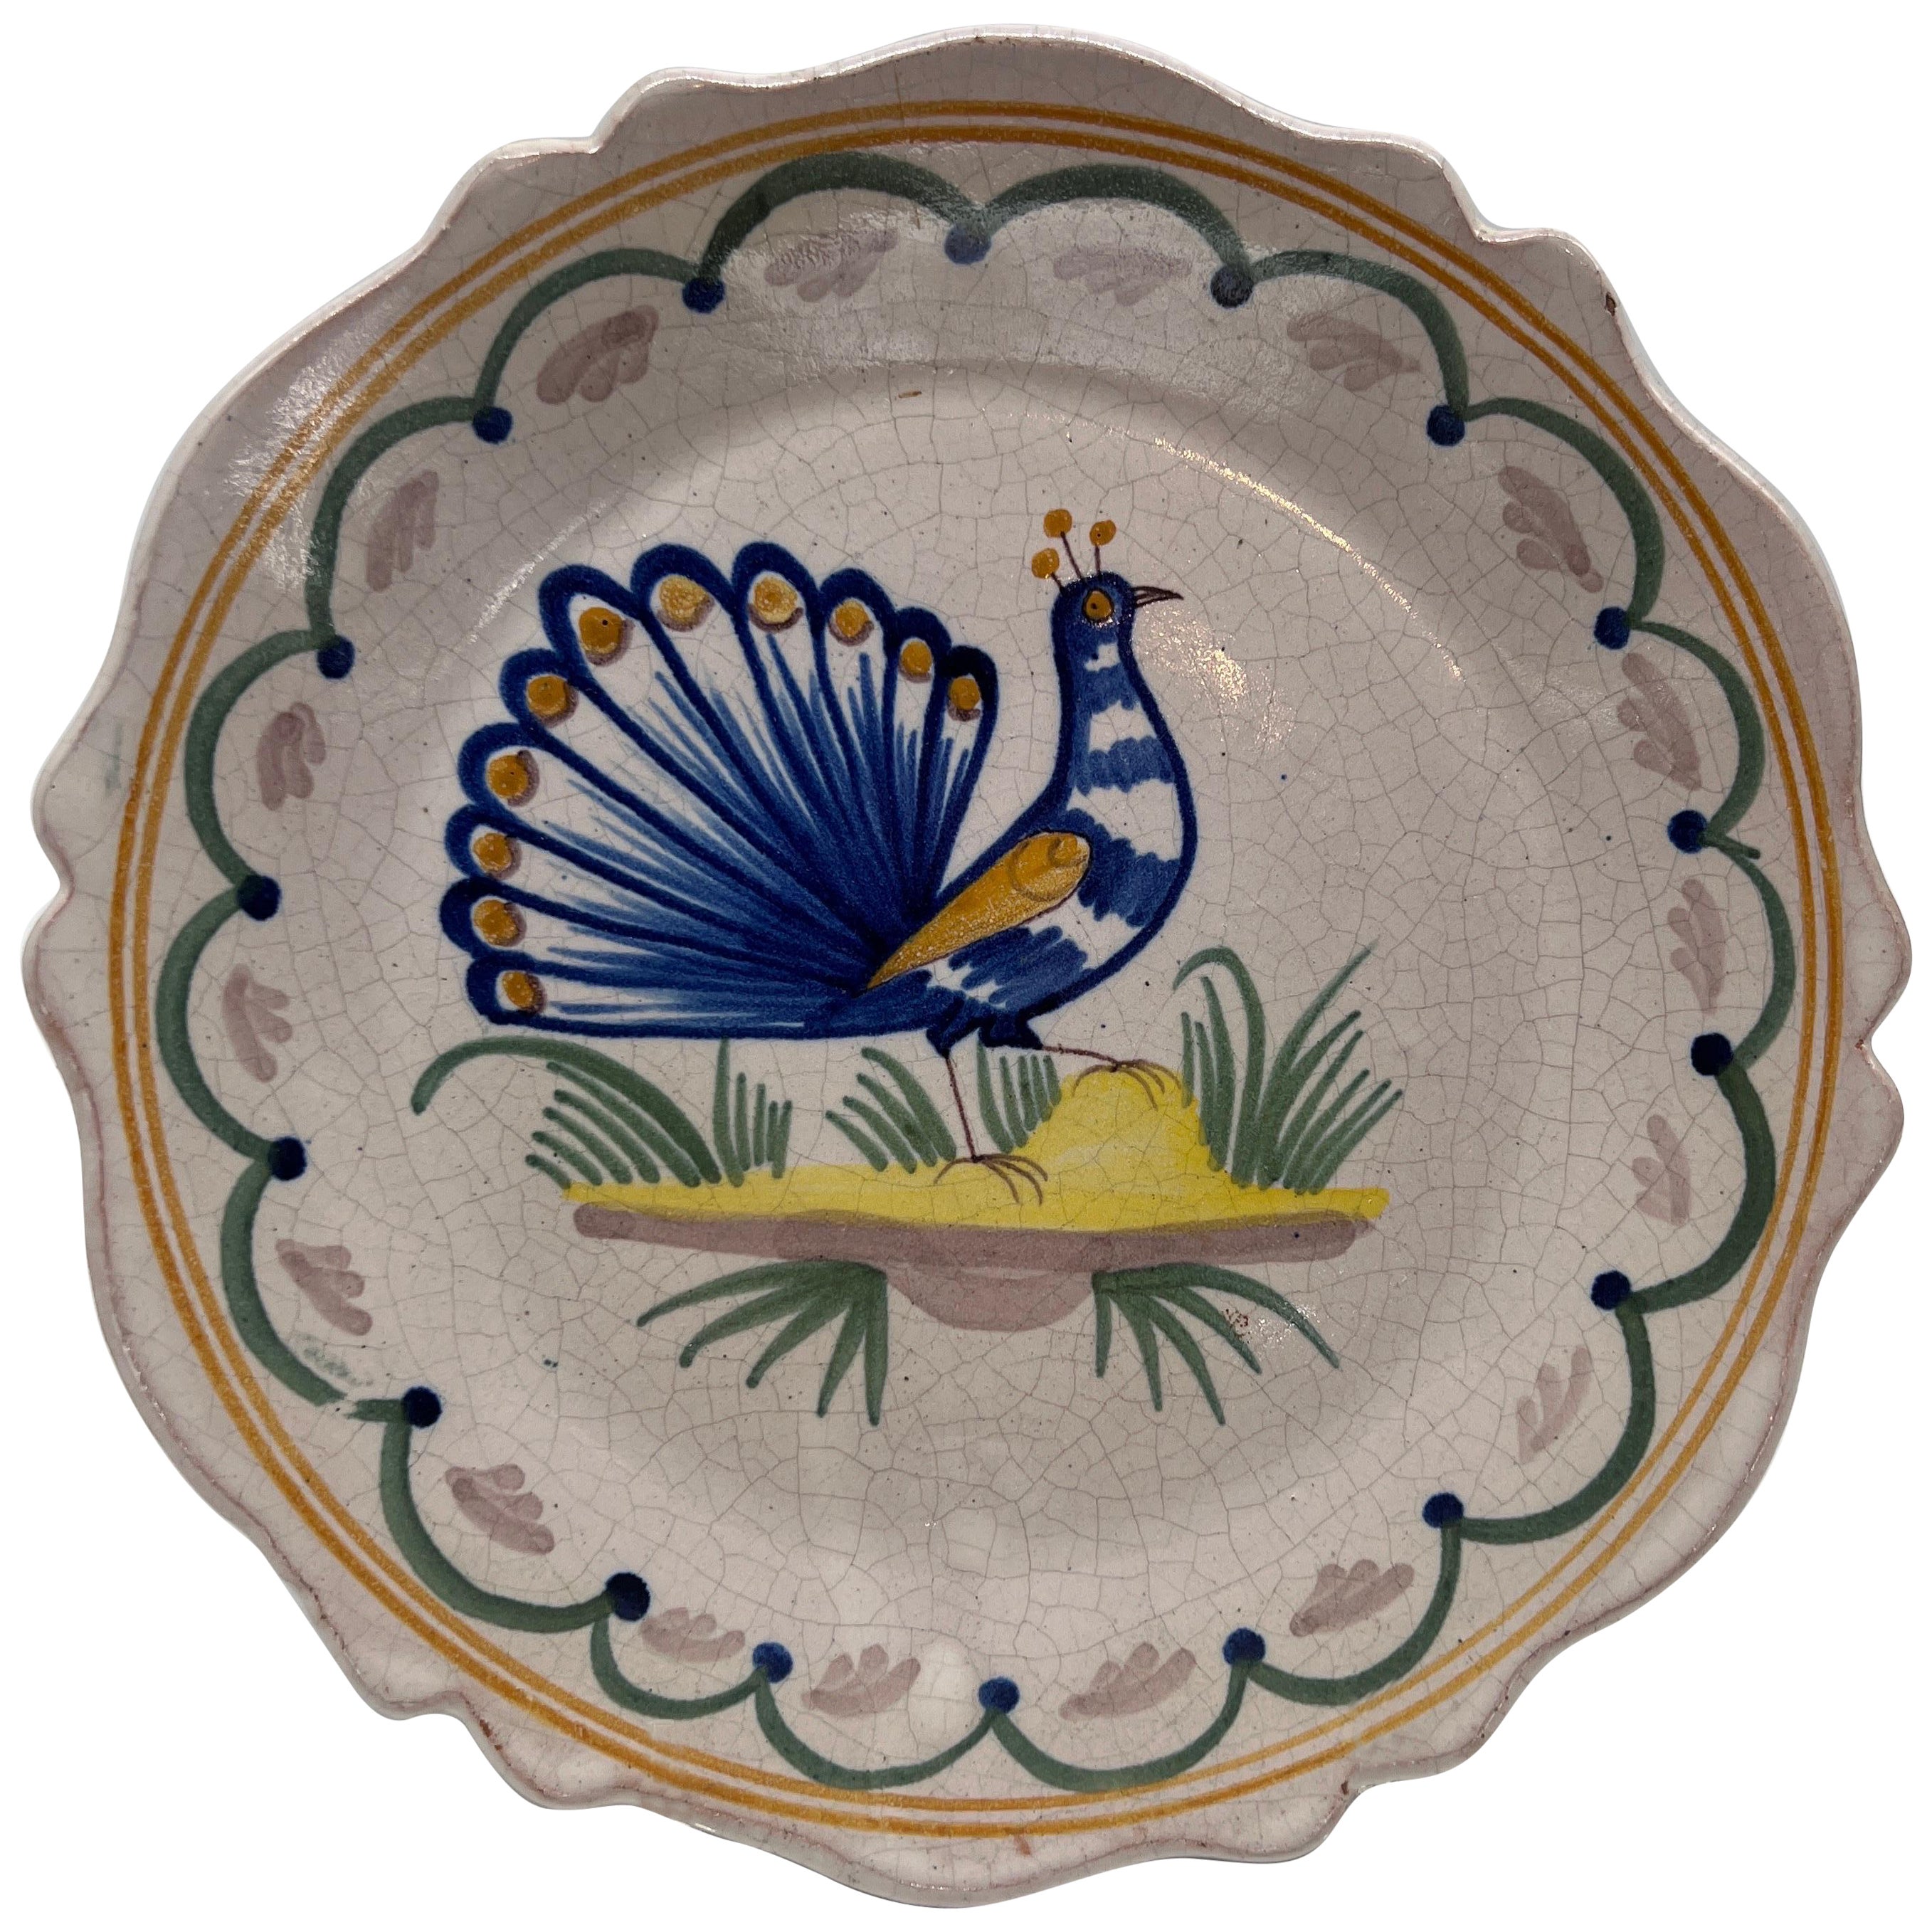 Vintage French Quimper Faience Pottery Peacock Plate